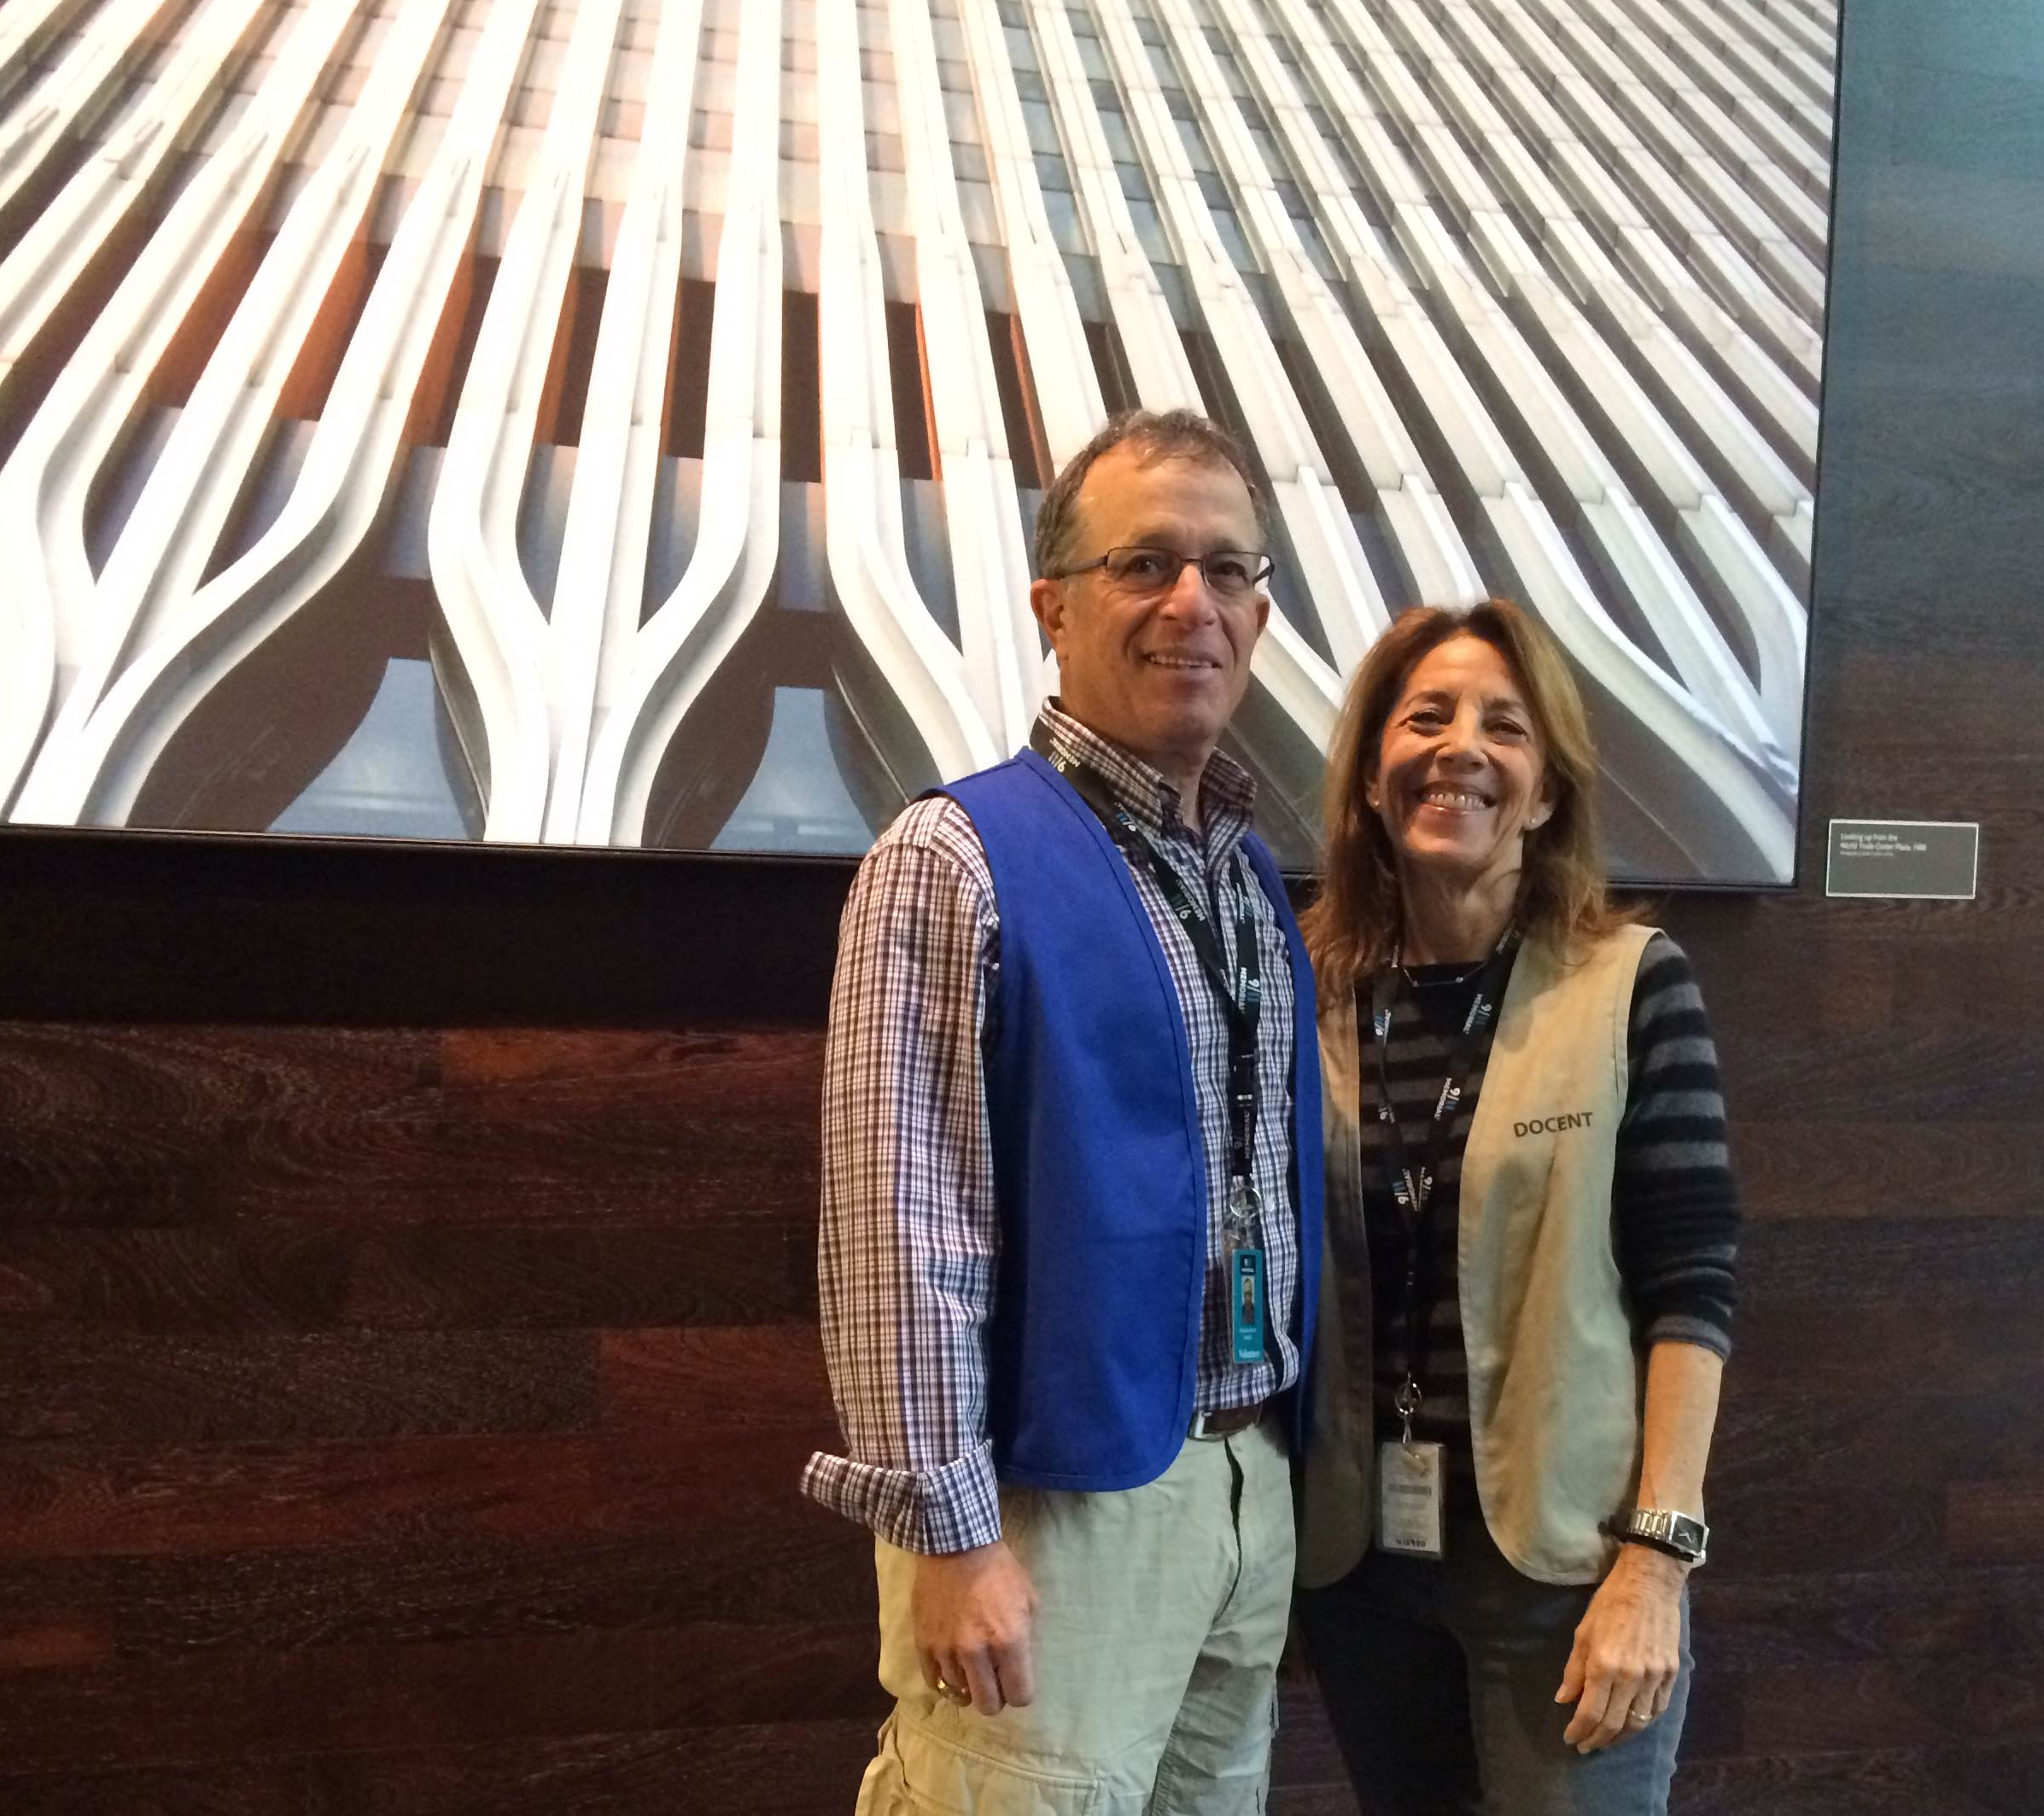 Ellen and Doug Burns, both volunteers at the 9/11 Memorial Museum, stand in front of a poster-sized, framed image of the Twin Towers.